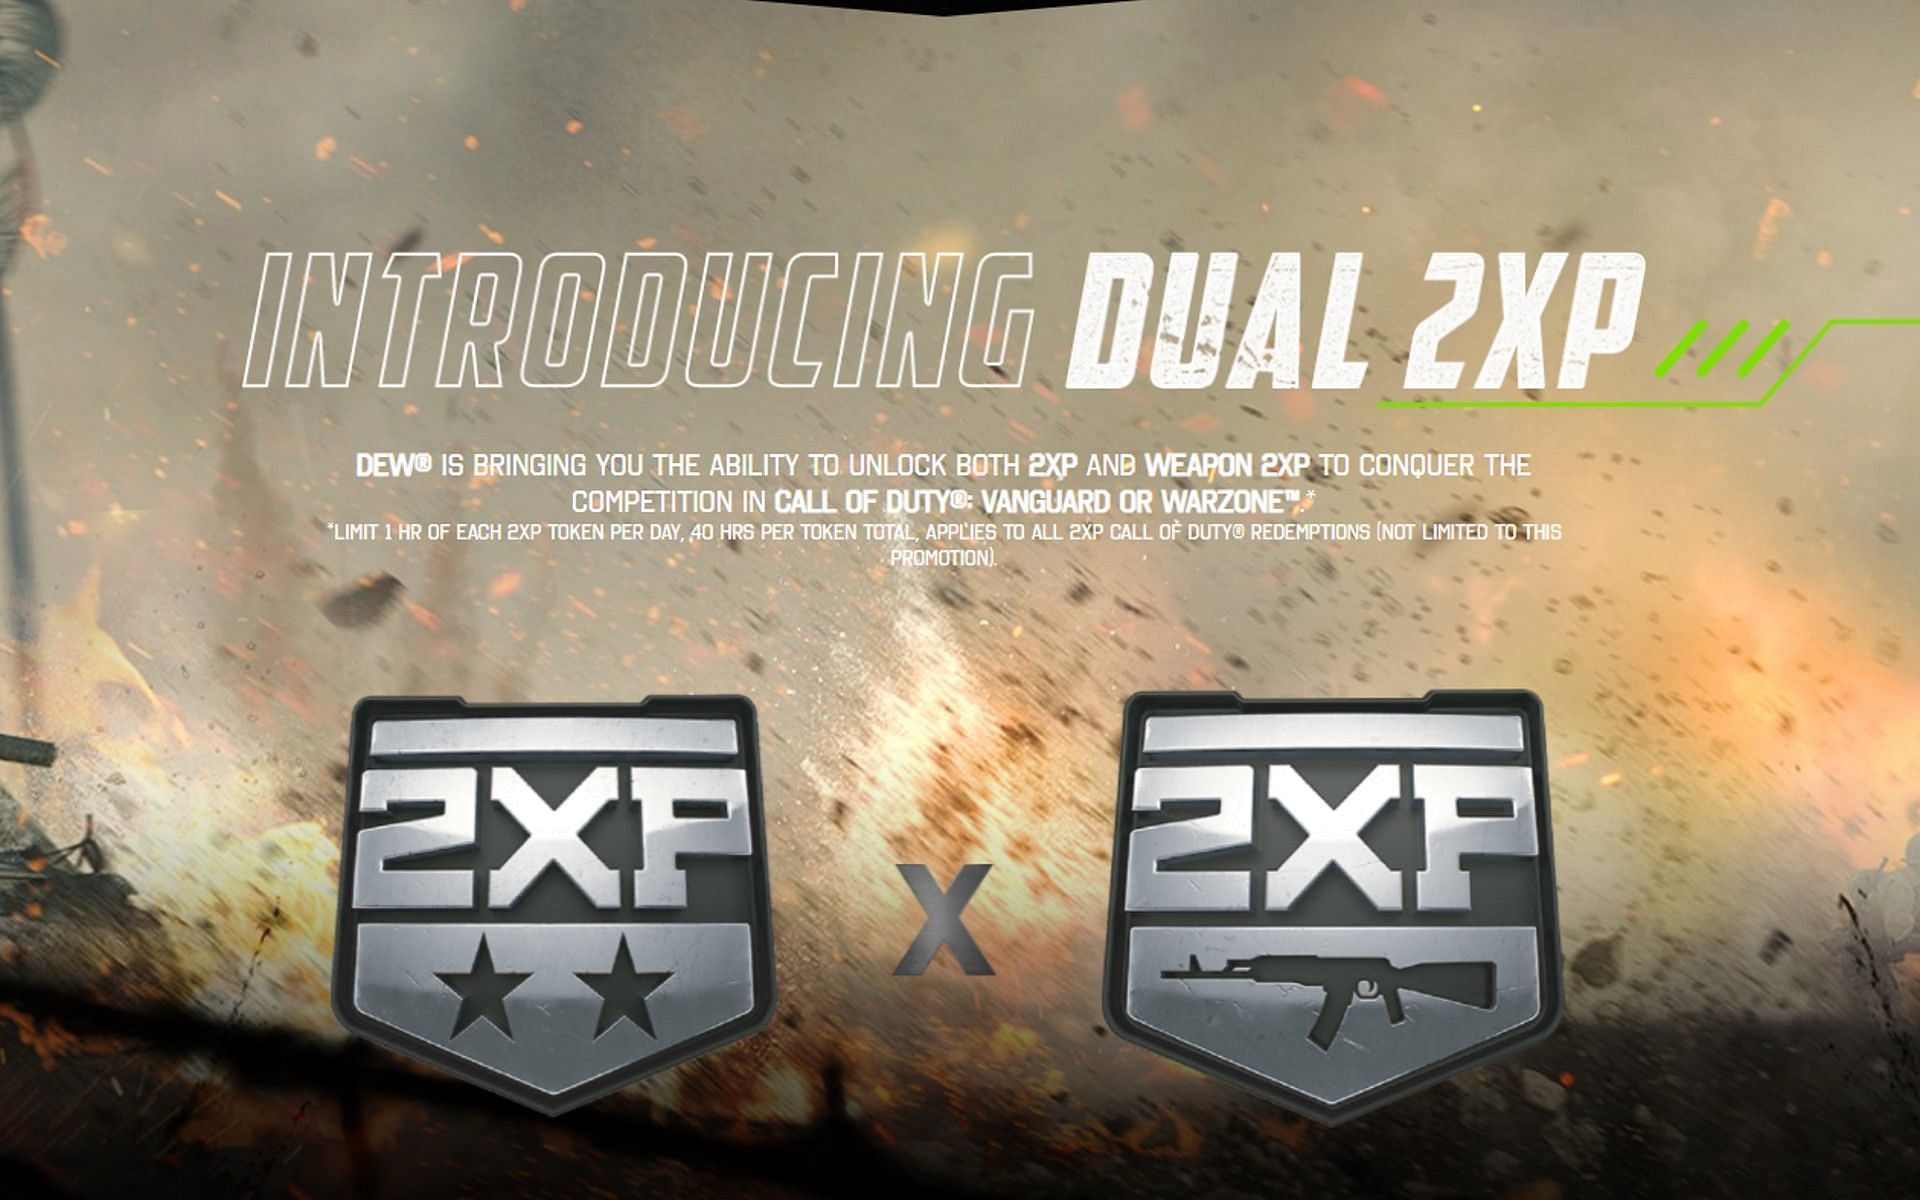 How to earn Double XP in Call of Duty Vanguard